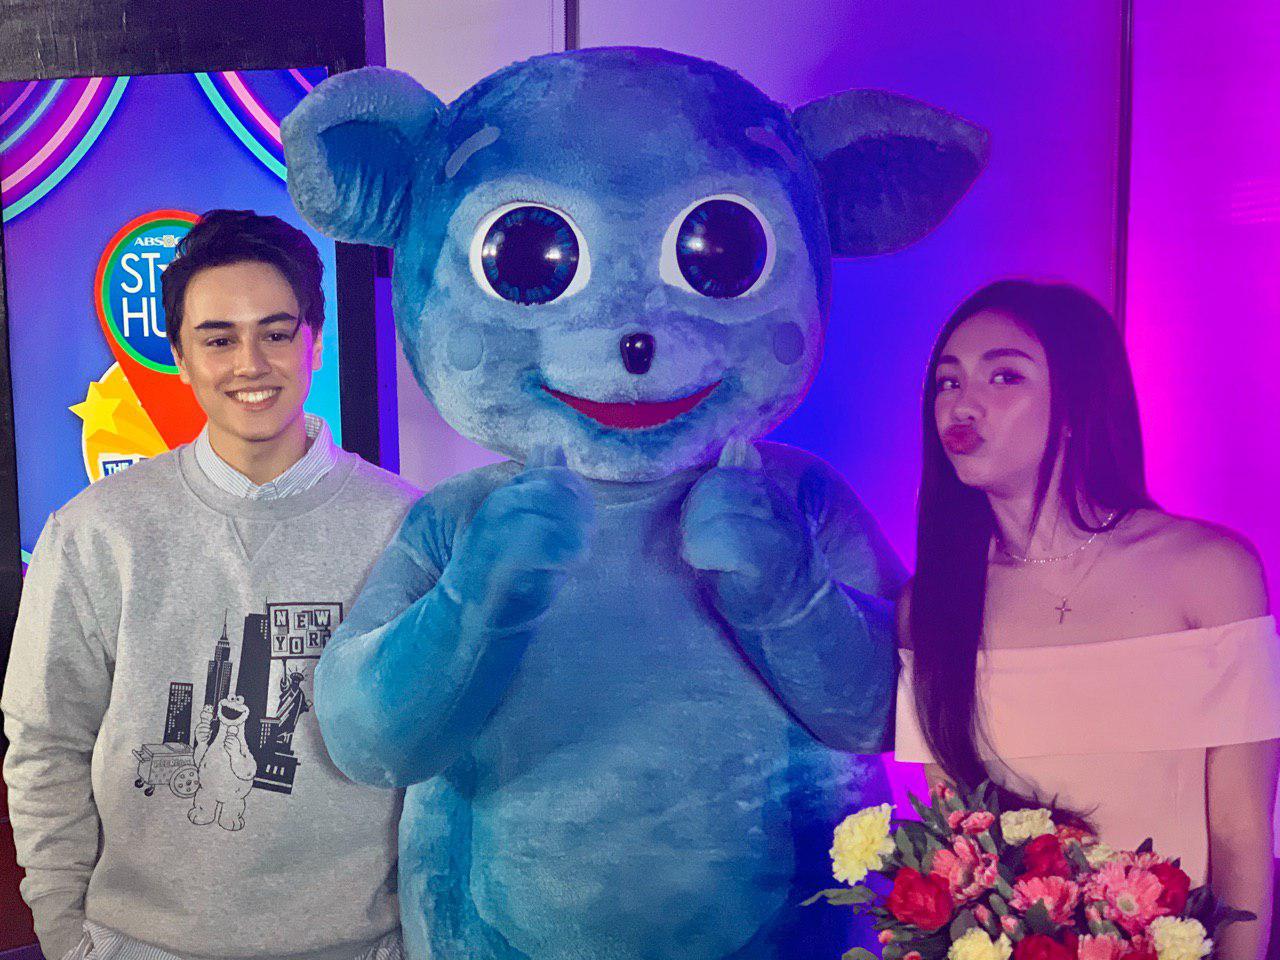 “Star Hunt The Global Showdown” is hosted by Edward Barber and Maymay Entrata